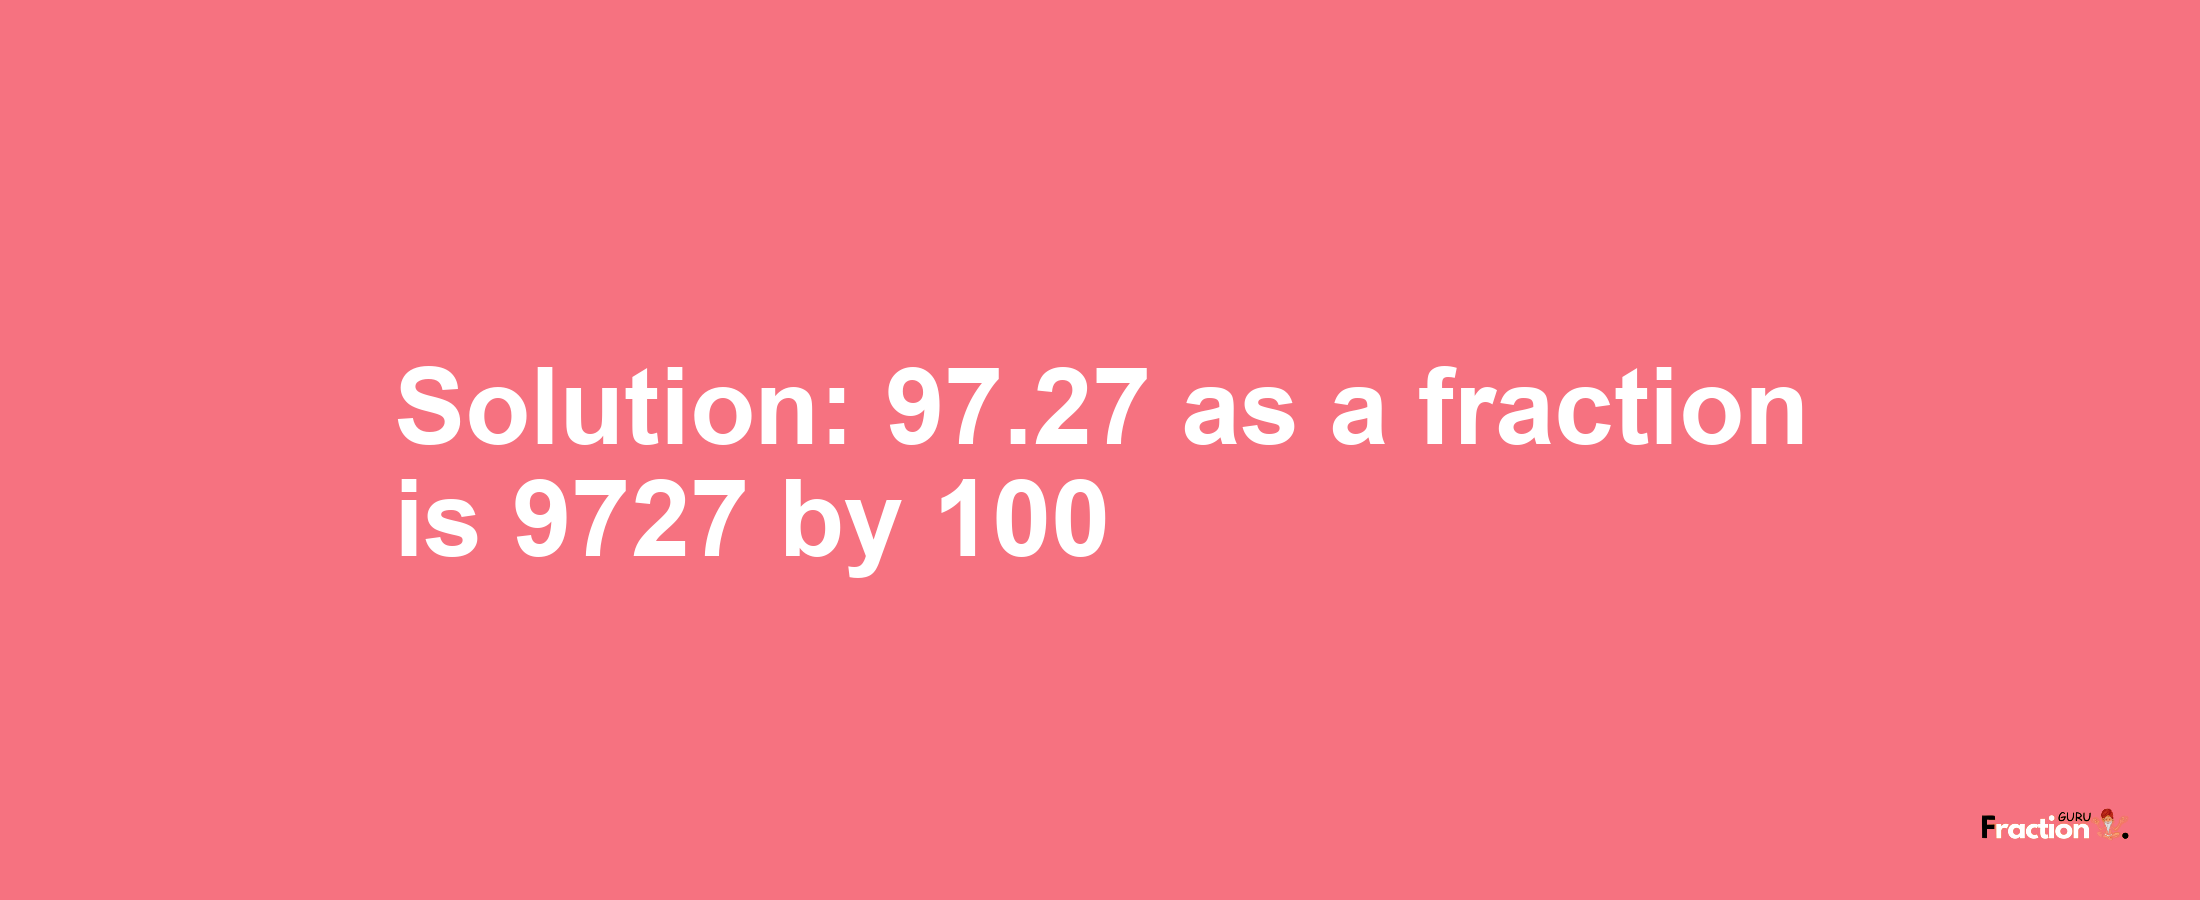 Solution:97.27 as a fraction is 9727/100